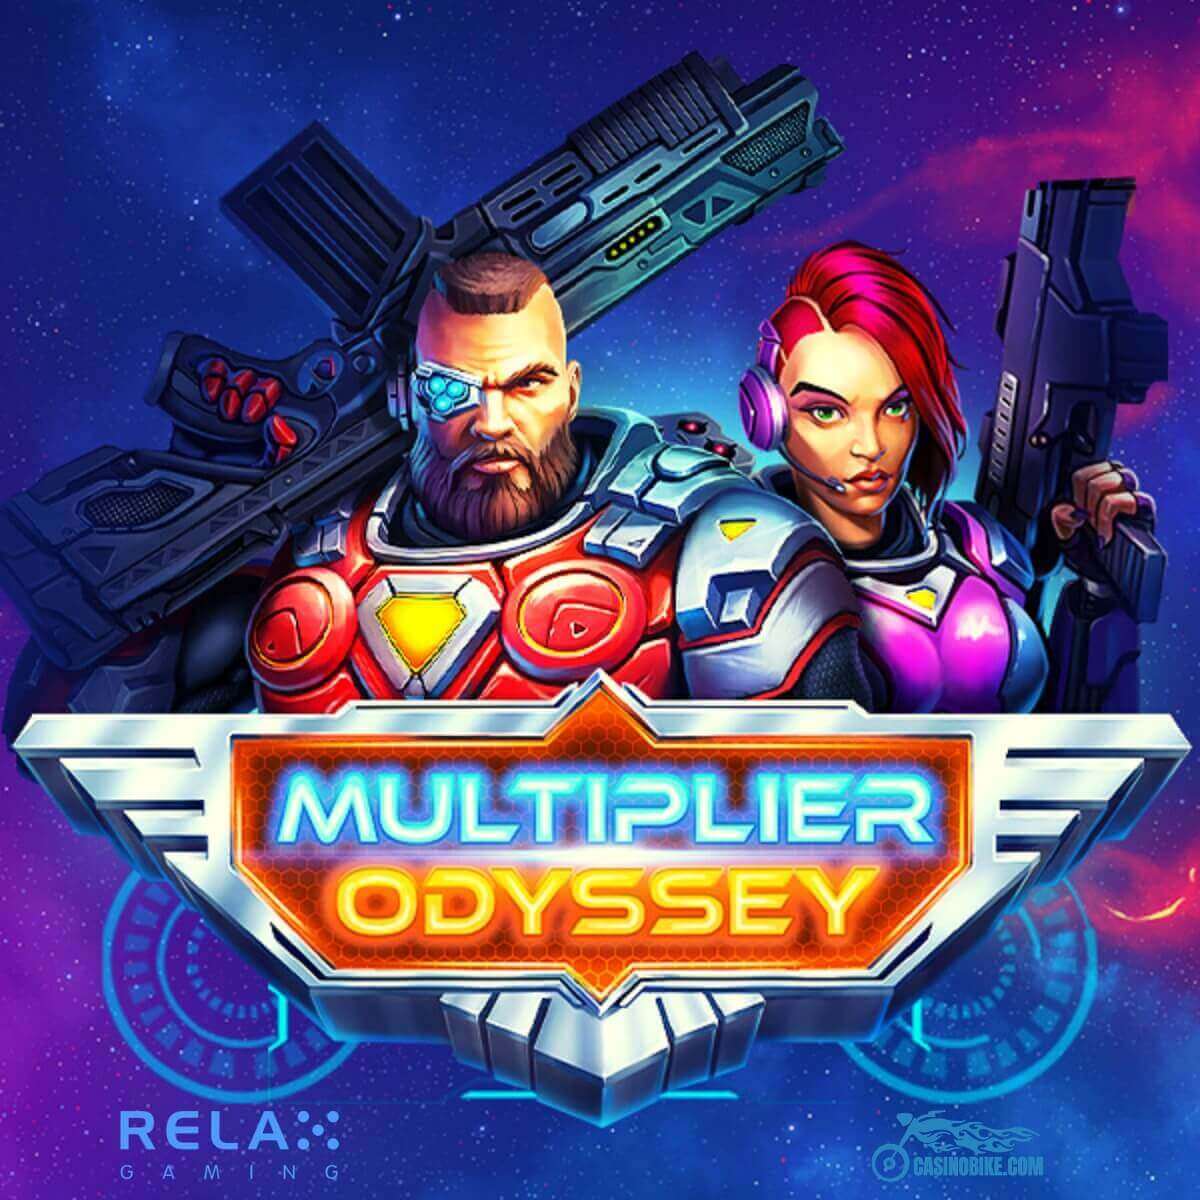 Multiplier Odyssey Slot by Relax Gaming